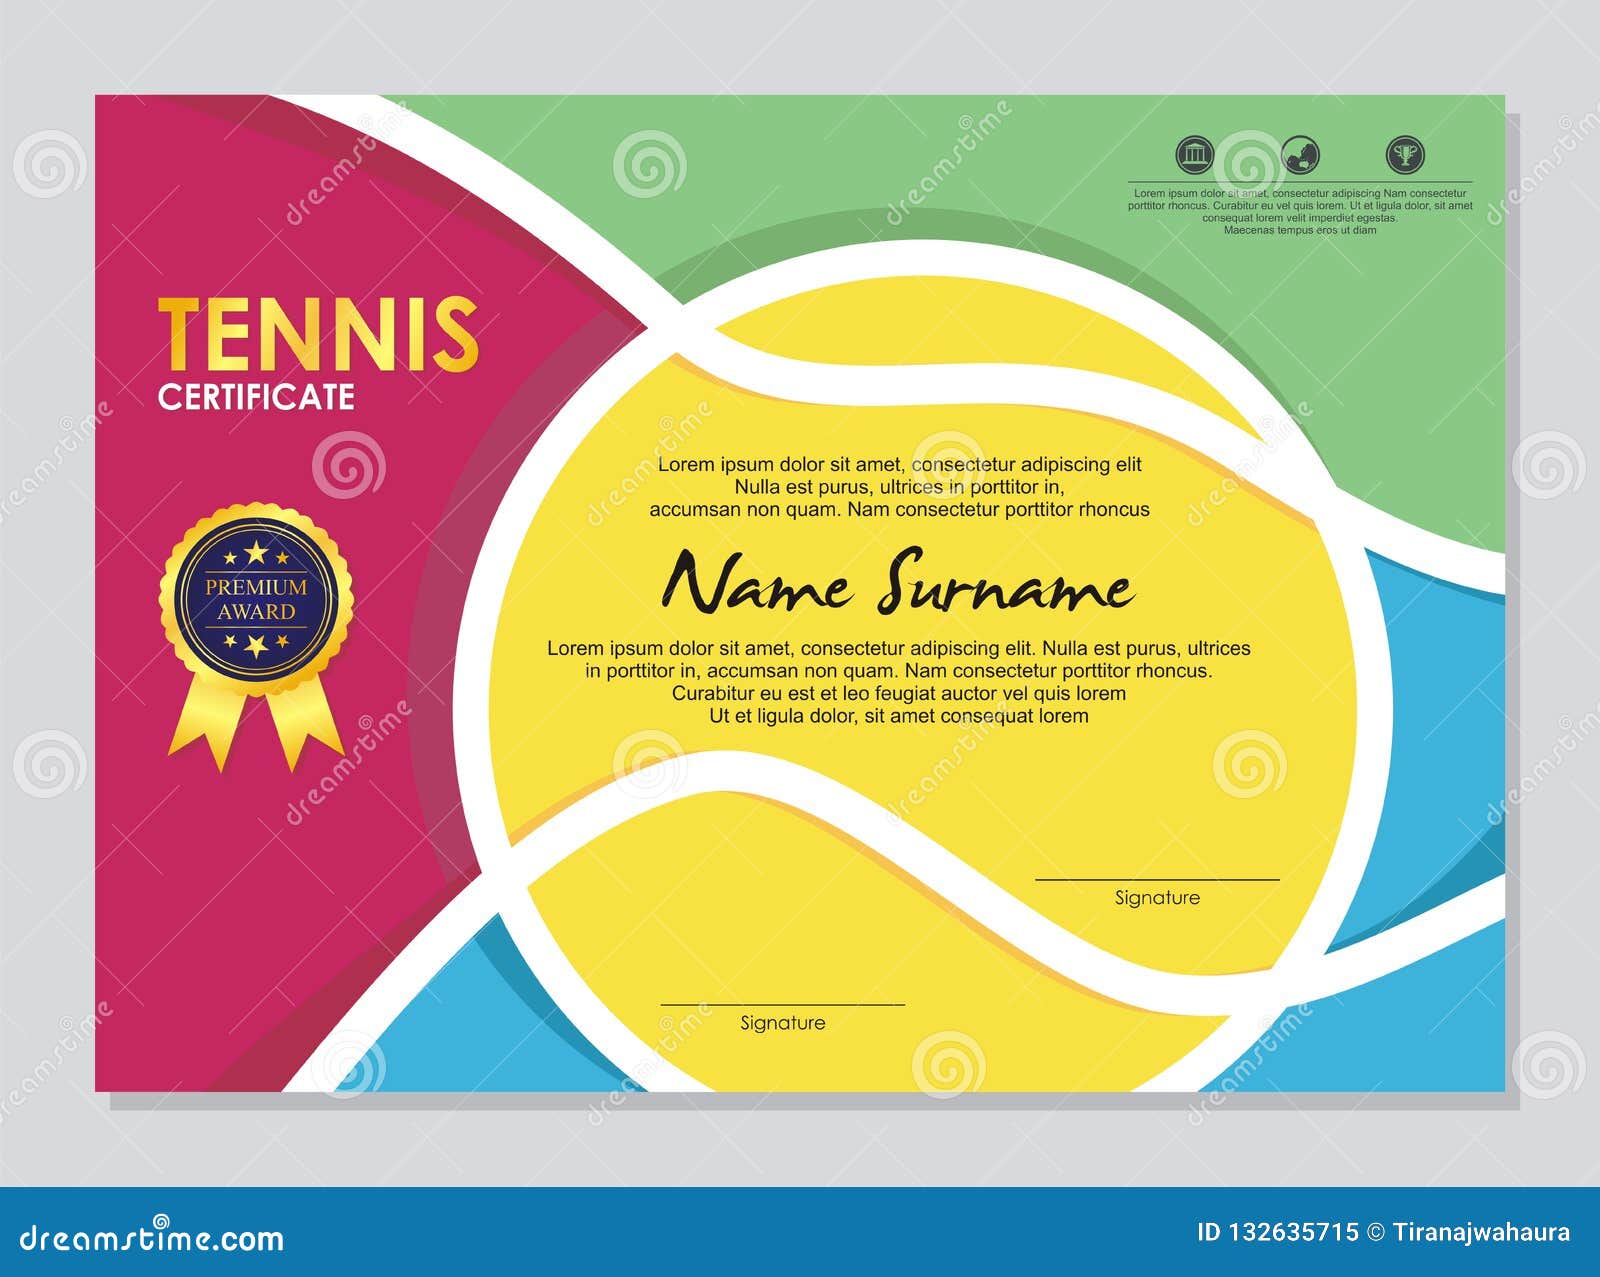 Tennis Certificate - Award Template with Colorful and Stylish For Tennis Certificate Template Free